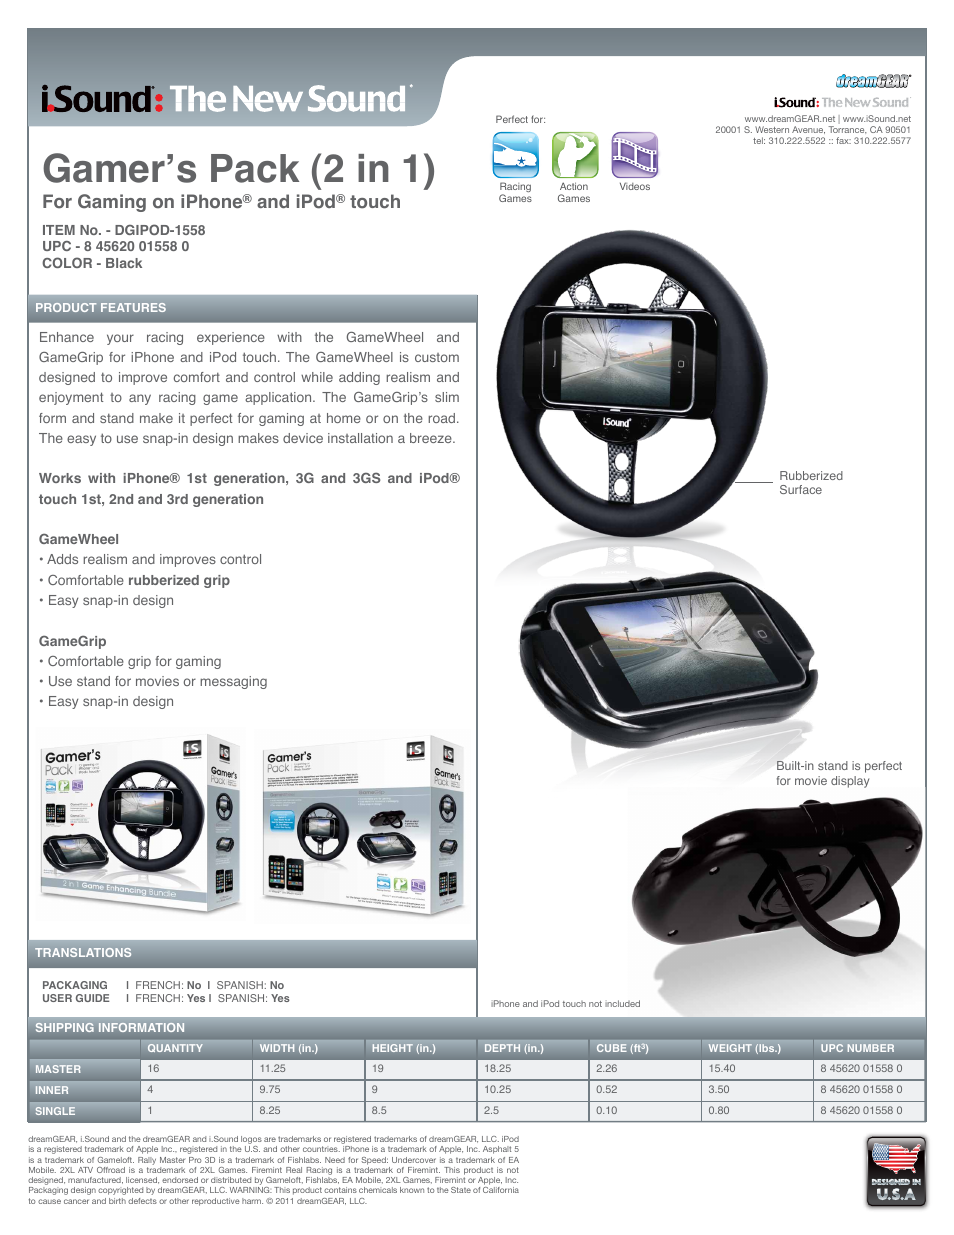 Gamer's Pack for iPhone and iPod Touch - Sell Sheet